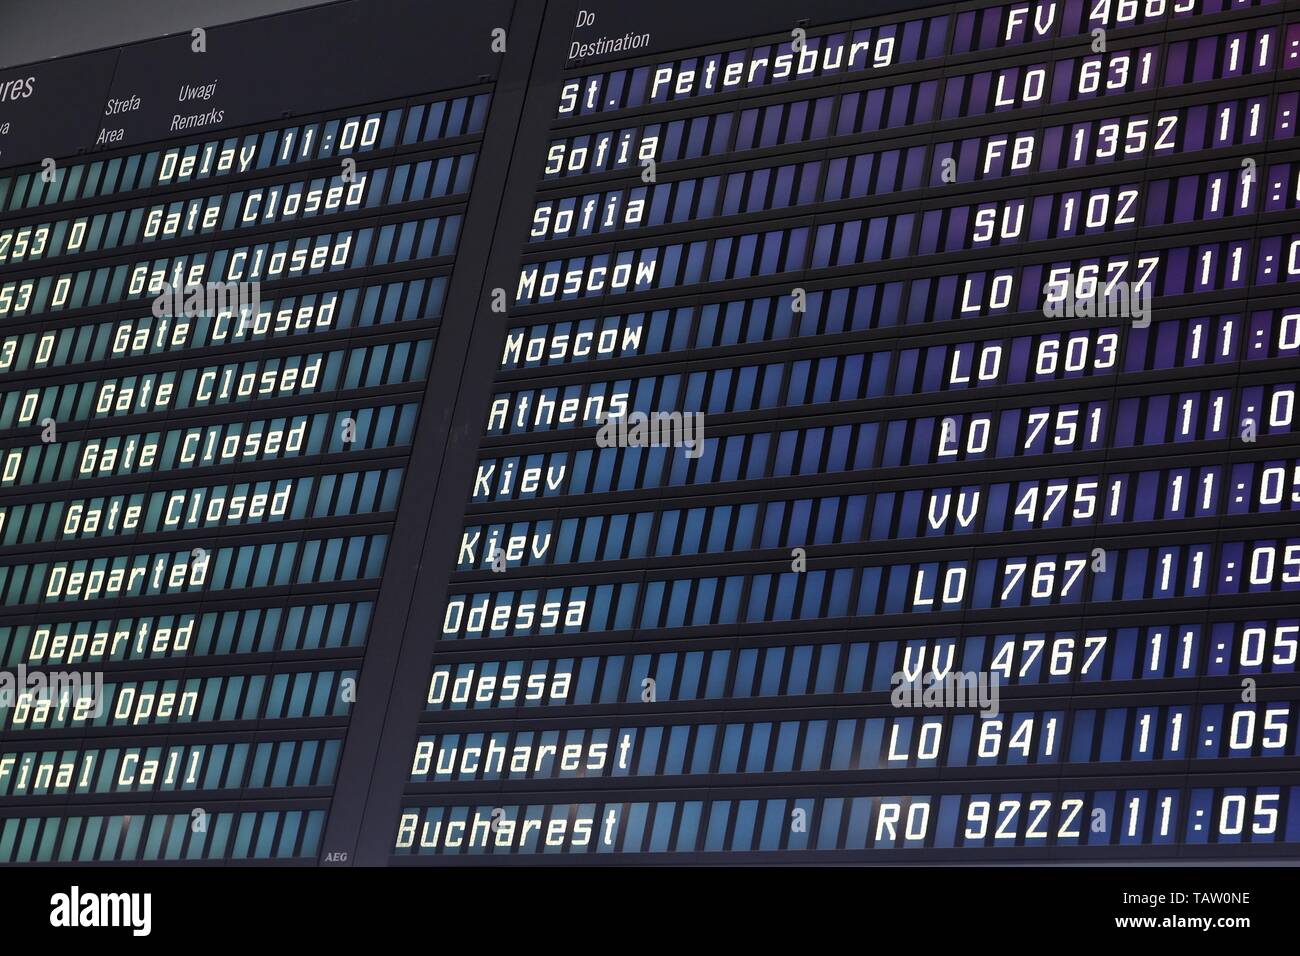 WARSAW, POLAND - AUGUST 31: Airport departures board on August 31, 2010 at Warsaw Chopin airport, Poland. With 8.7 million passengers for 2010, it is  Stock Photo